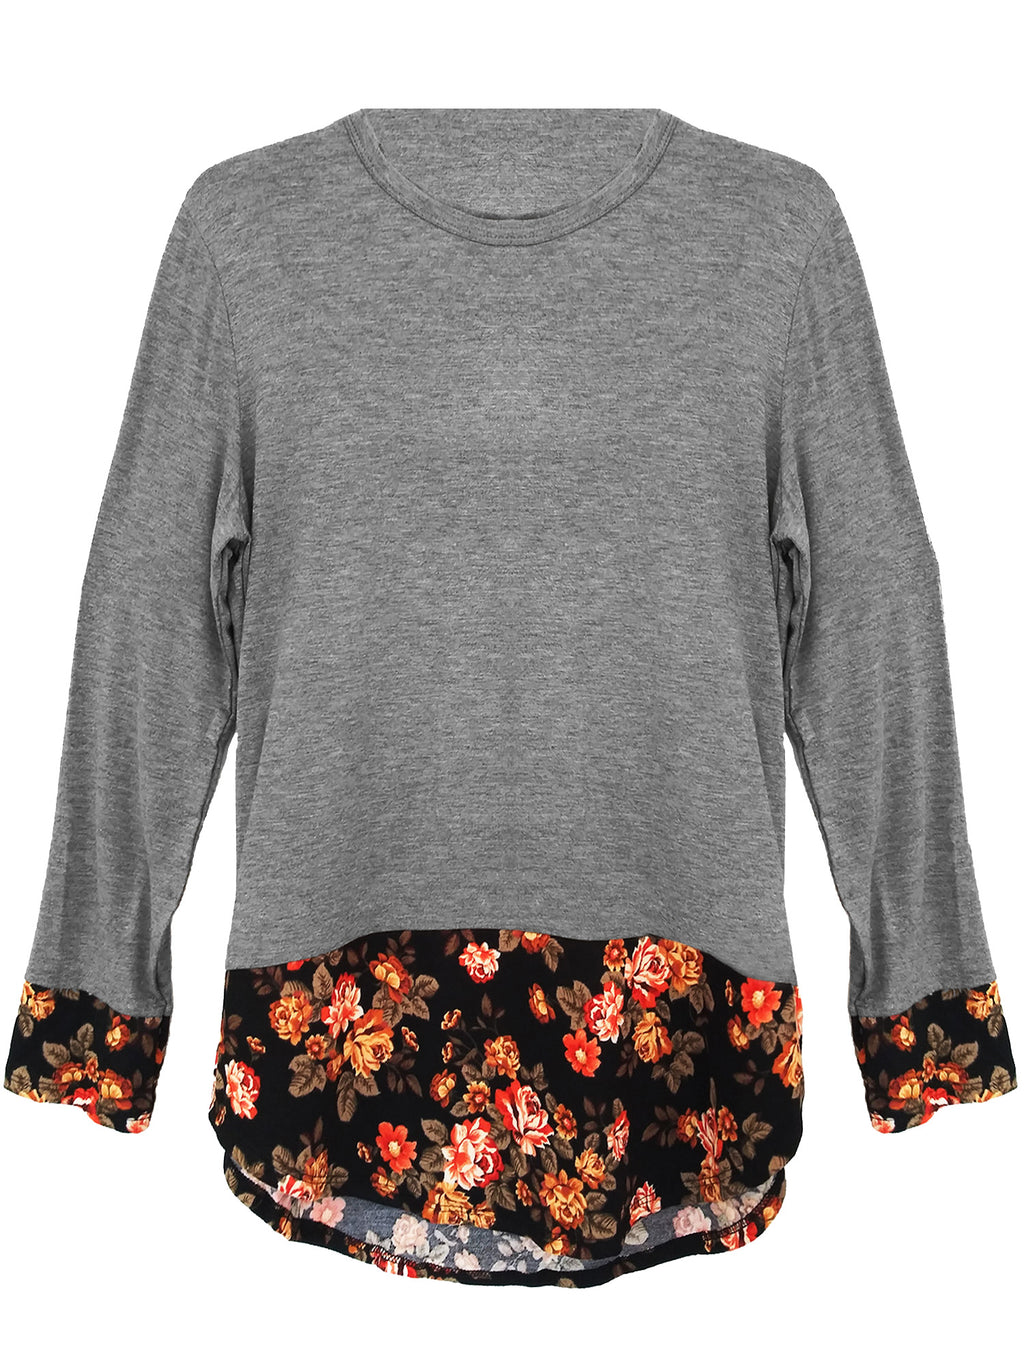 Gray Floral Trimmed Plus Size Long Sleeve Top